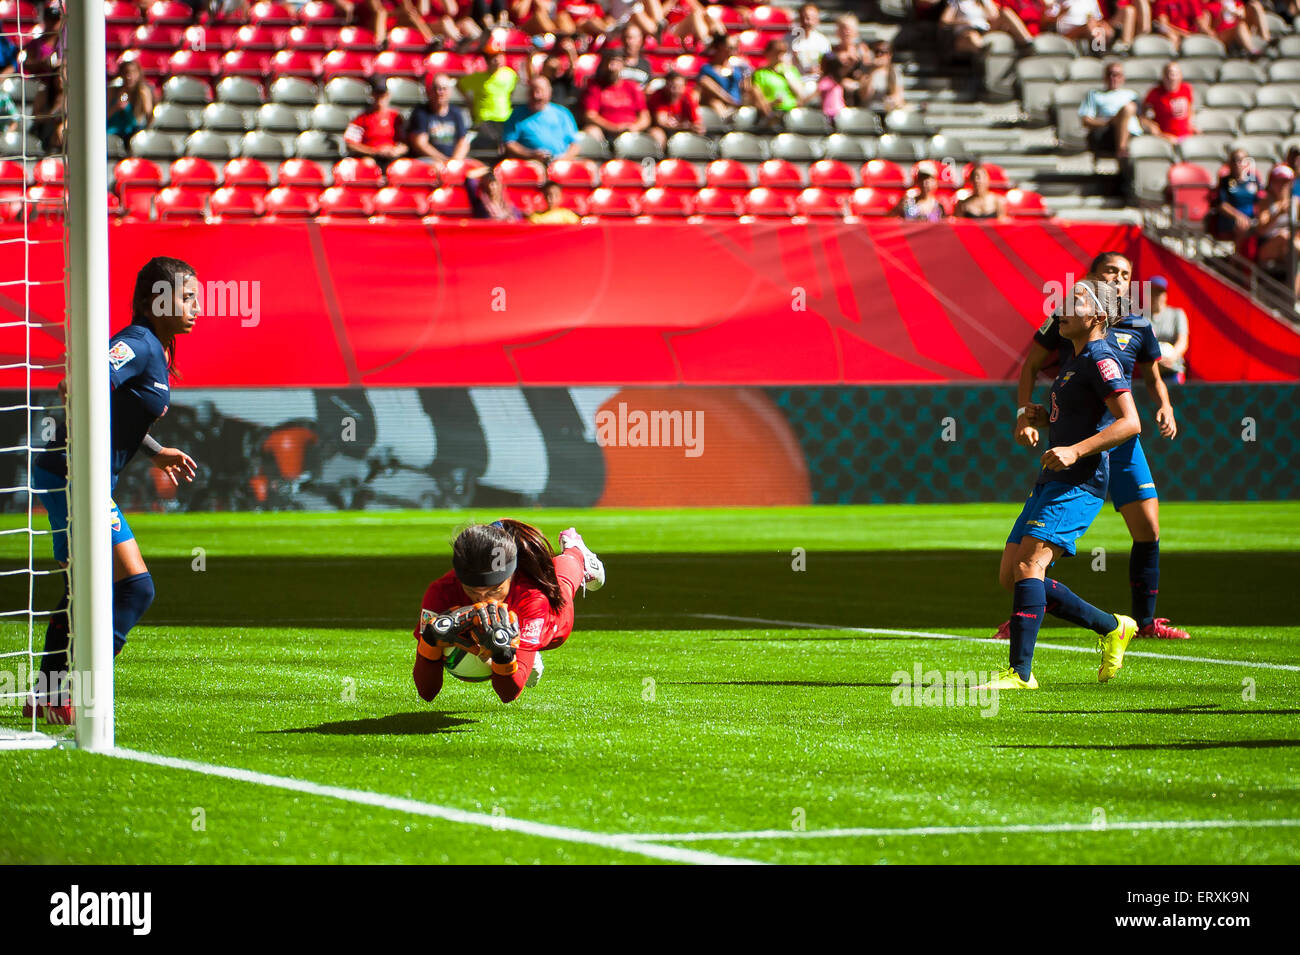 Vancouver, Canada. 8th June, 2015. Ecuador goalkeeper Shirley BERRUZ (#1) dives with the ball during the opening round match between Cameroon and Ecuador of the FIFA Women's World Cup Canada 2015 at BC Place Stadium. Cameroon won the match 6-0. Credit:  Matt Jacques/Alamy Live News Stock Photo